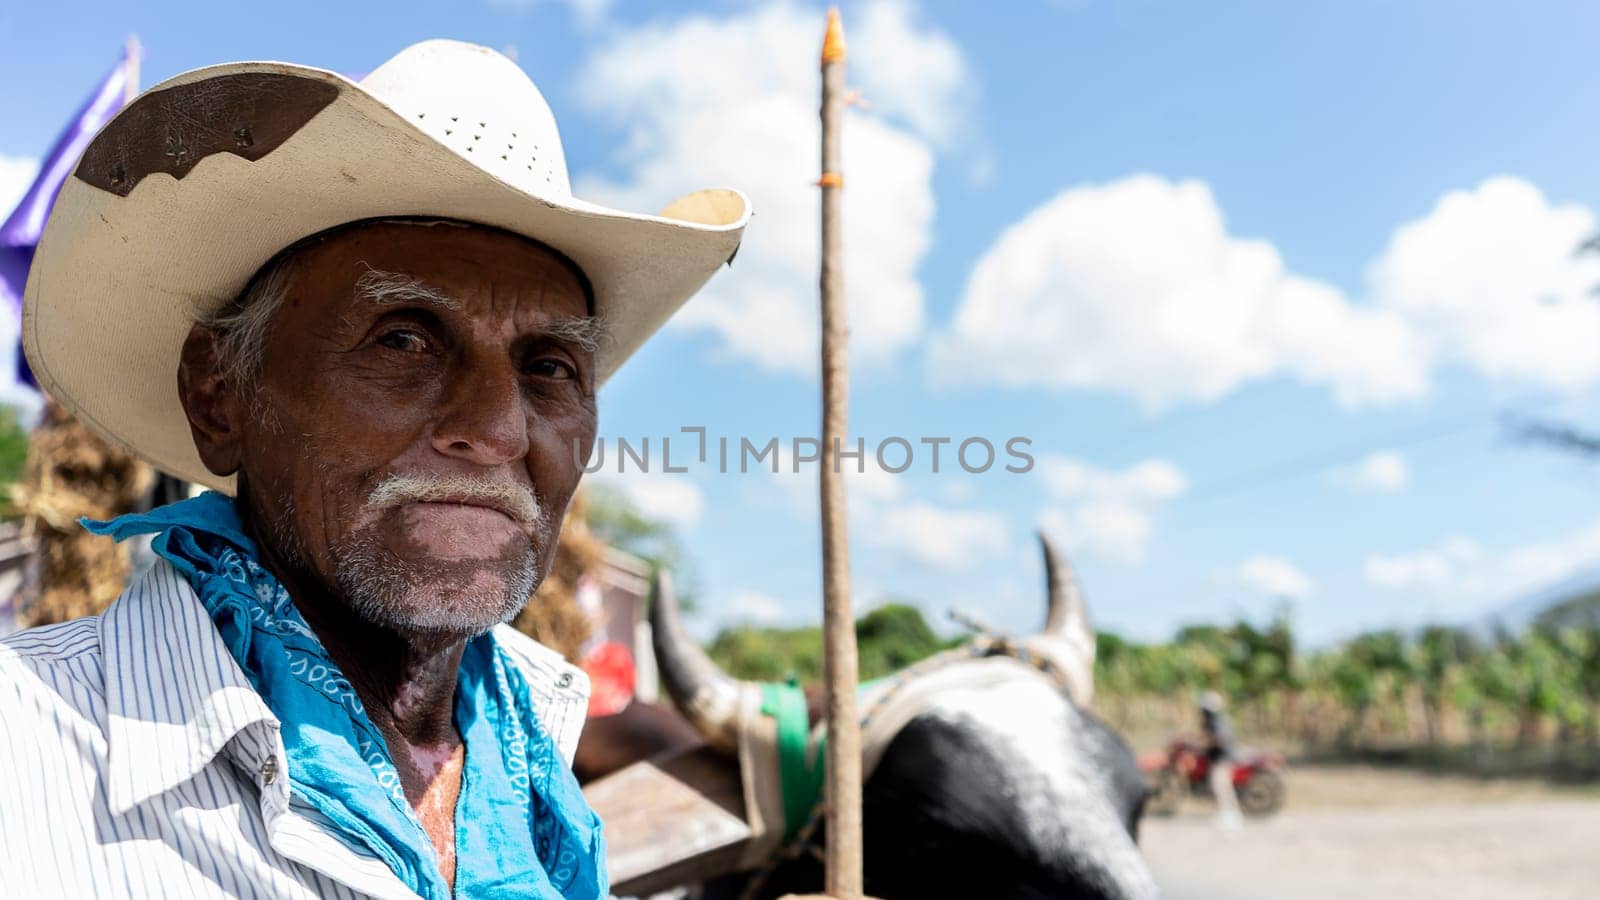 Closeup to the face of a Latino farmer with vitiligo who carries a rod to steer oxcarts in Rivas, Nicaragua, latin america